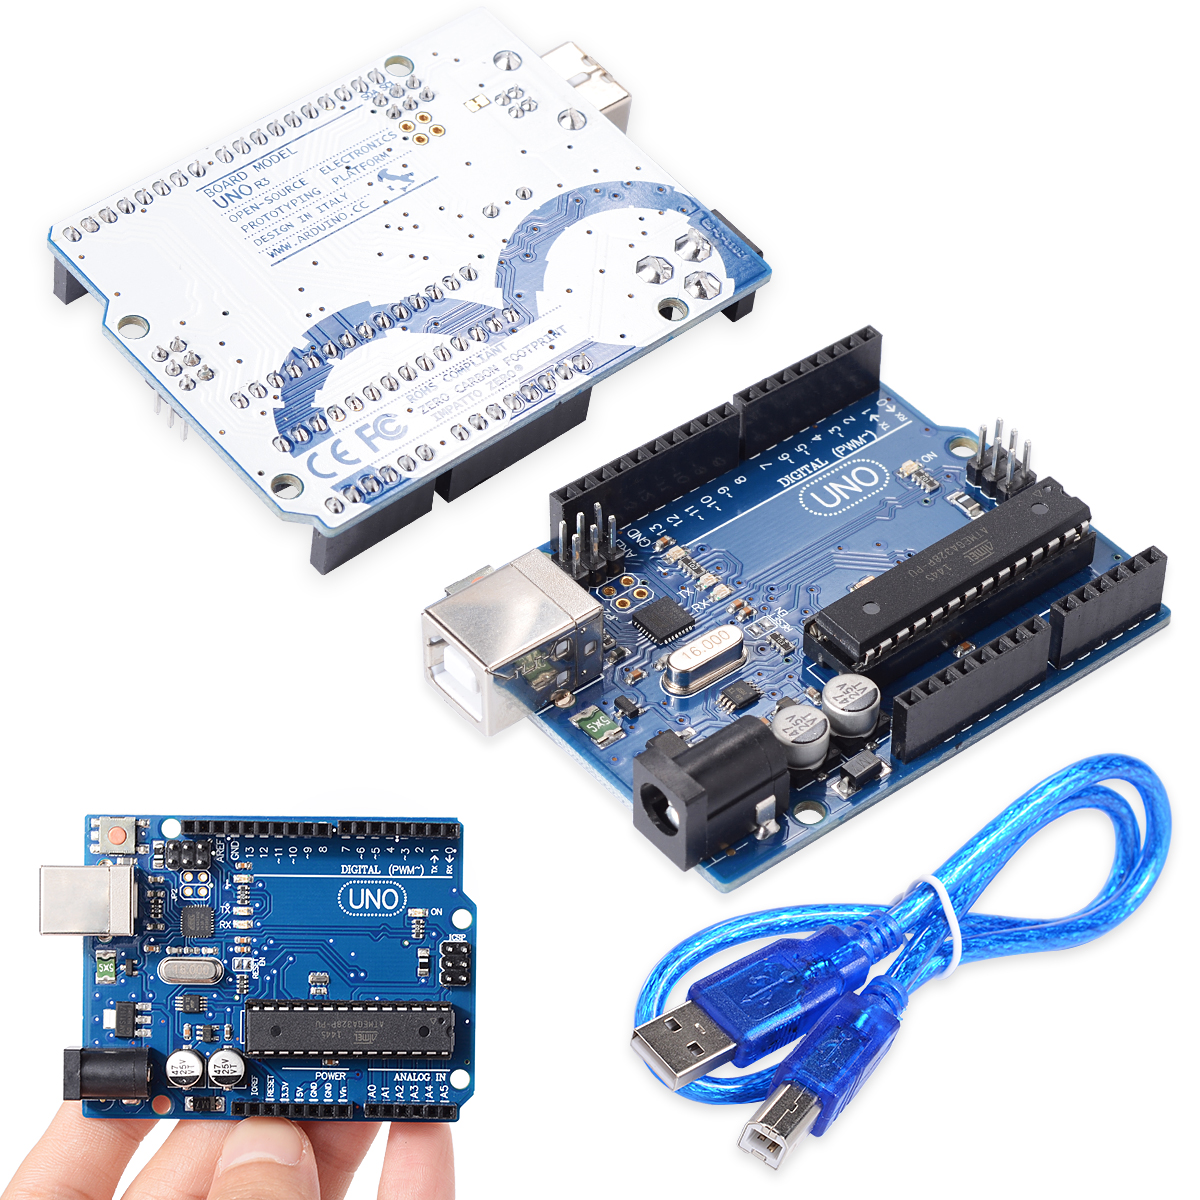 Buy Arduino Uno R3 In Pakistan With Usb Cable Circuitpk 3828